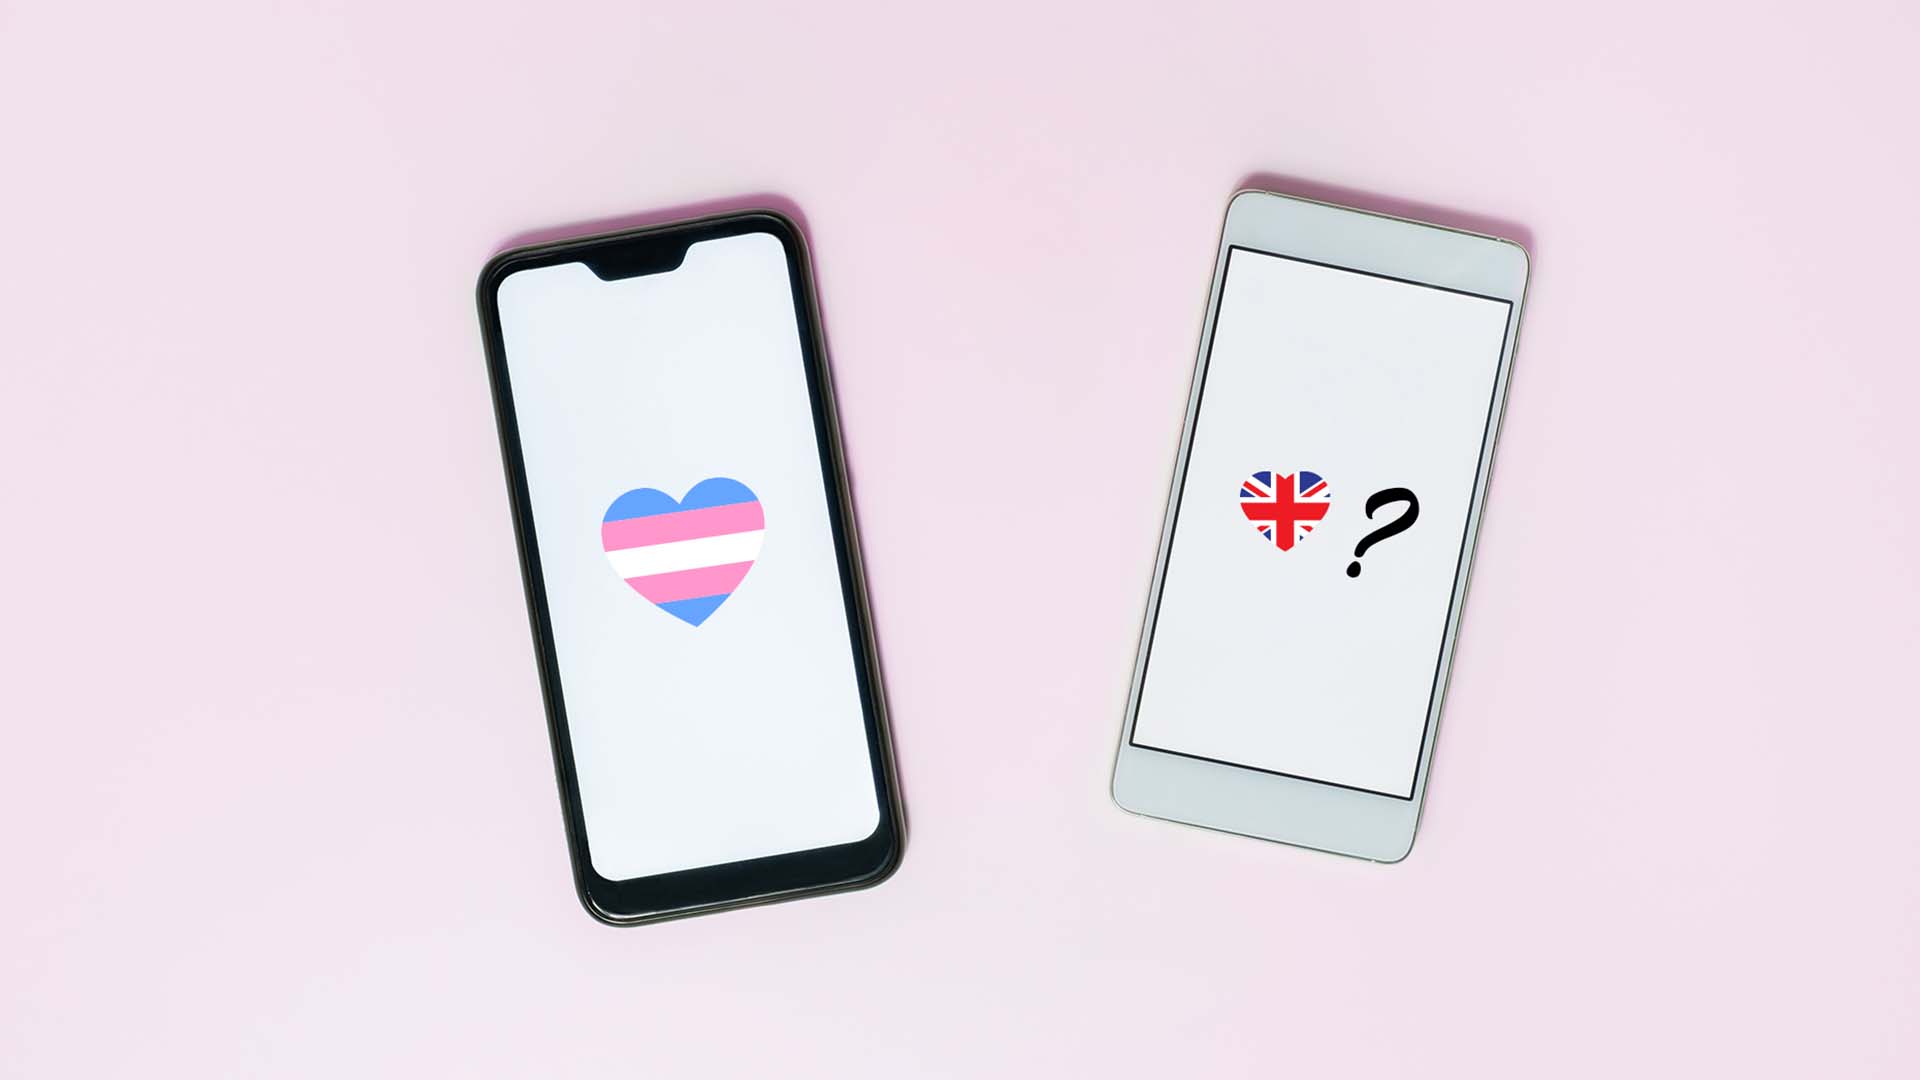 One phone features the transgender flag, love heart shape on its screen, and the other the UK flag next to a question mark.